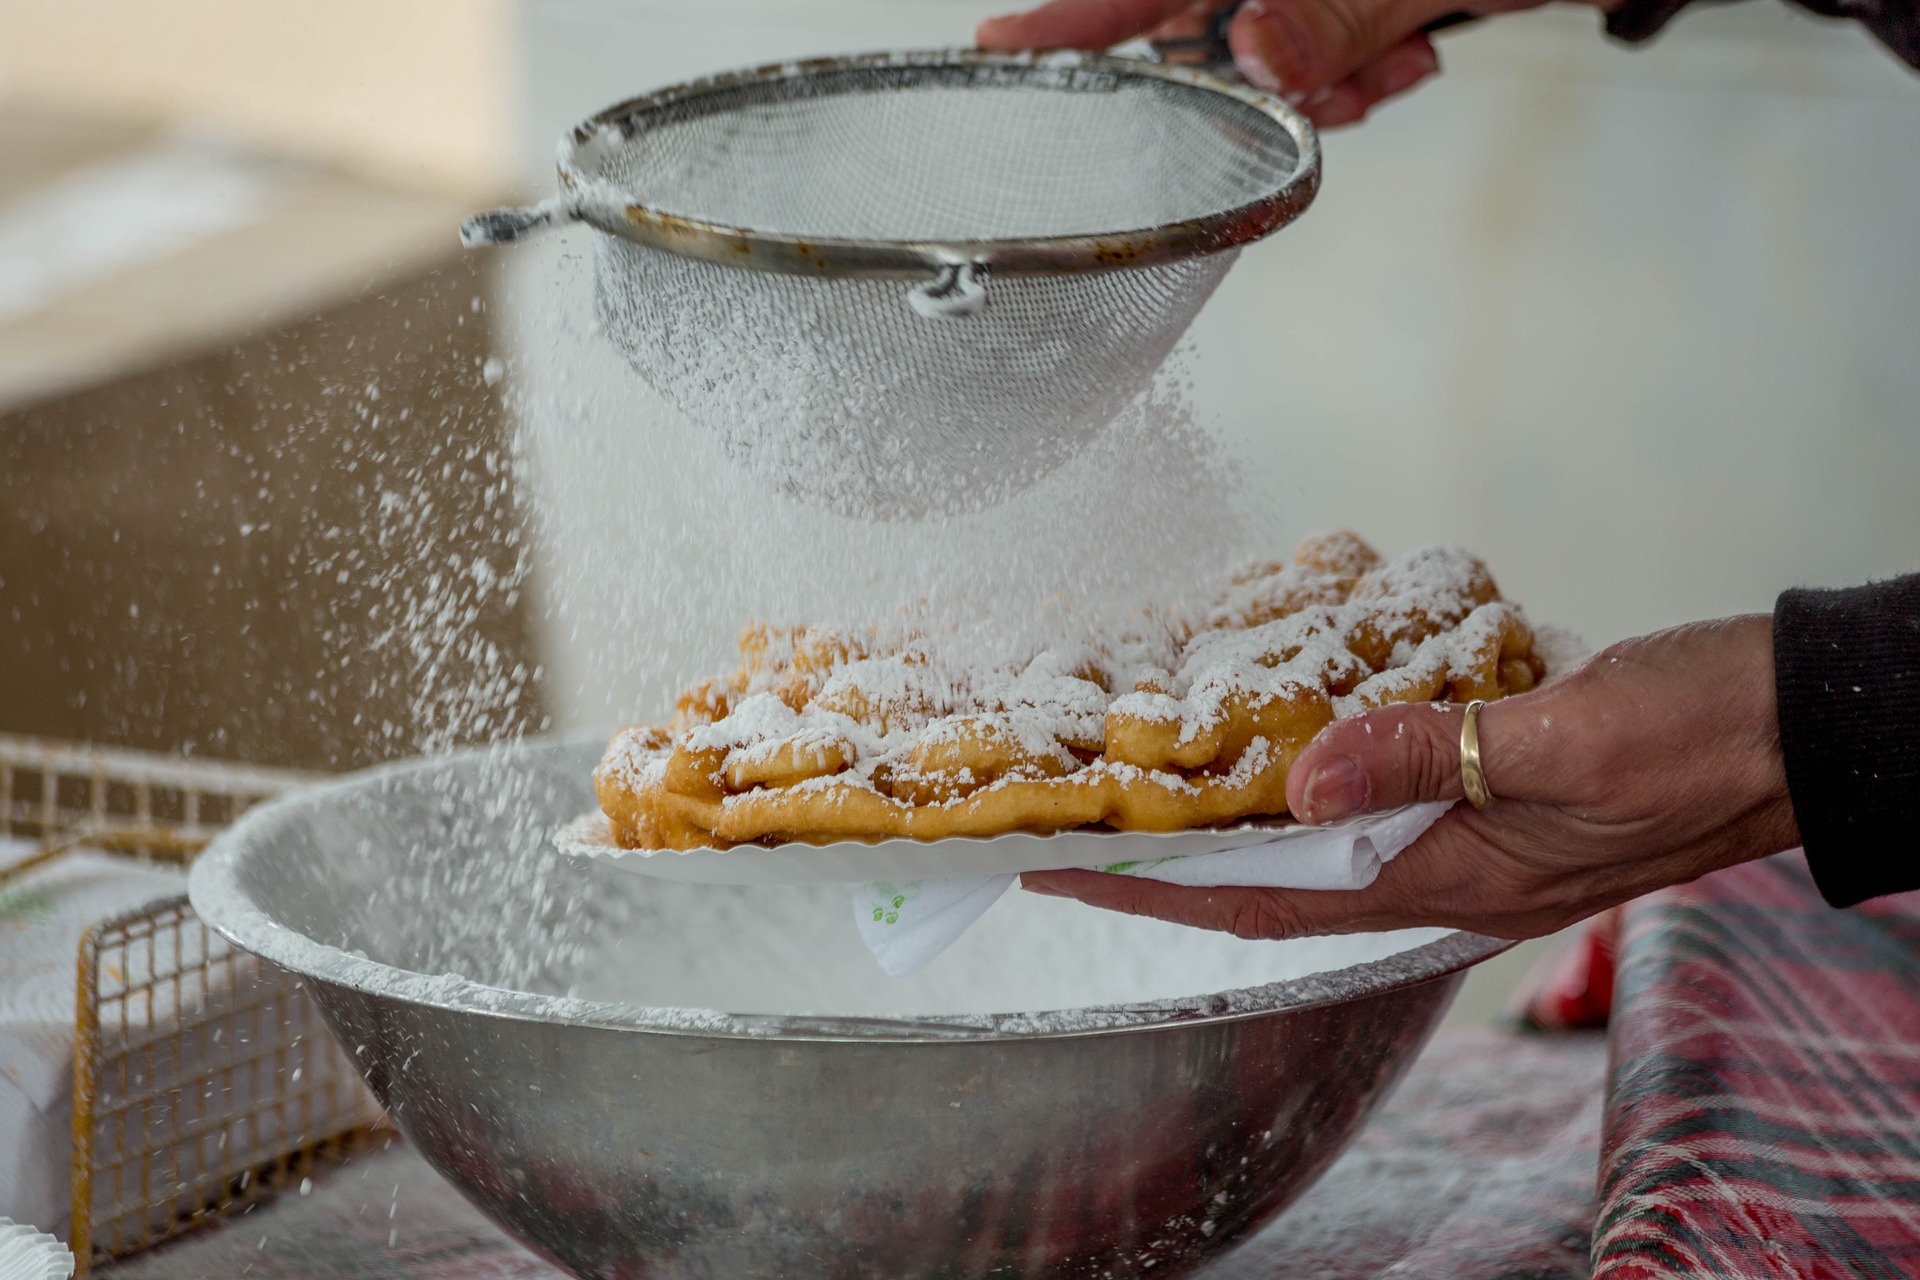 Powdered sugar being sprinkled on a funnel cake